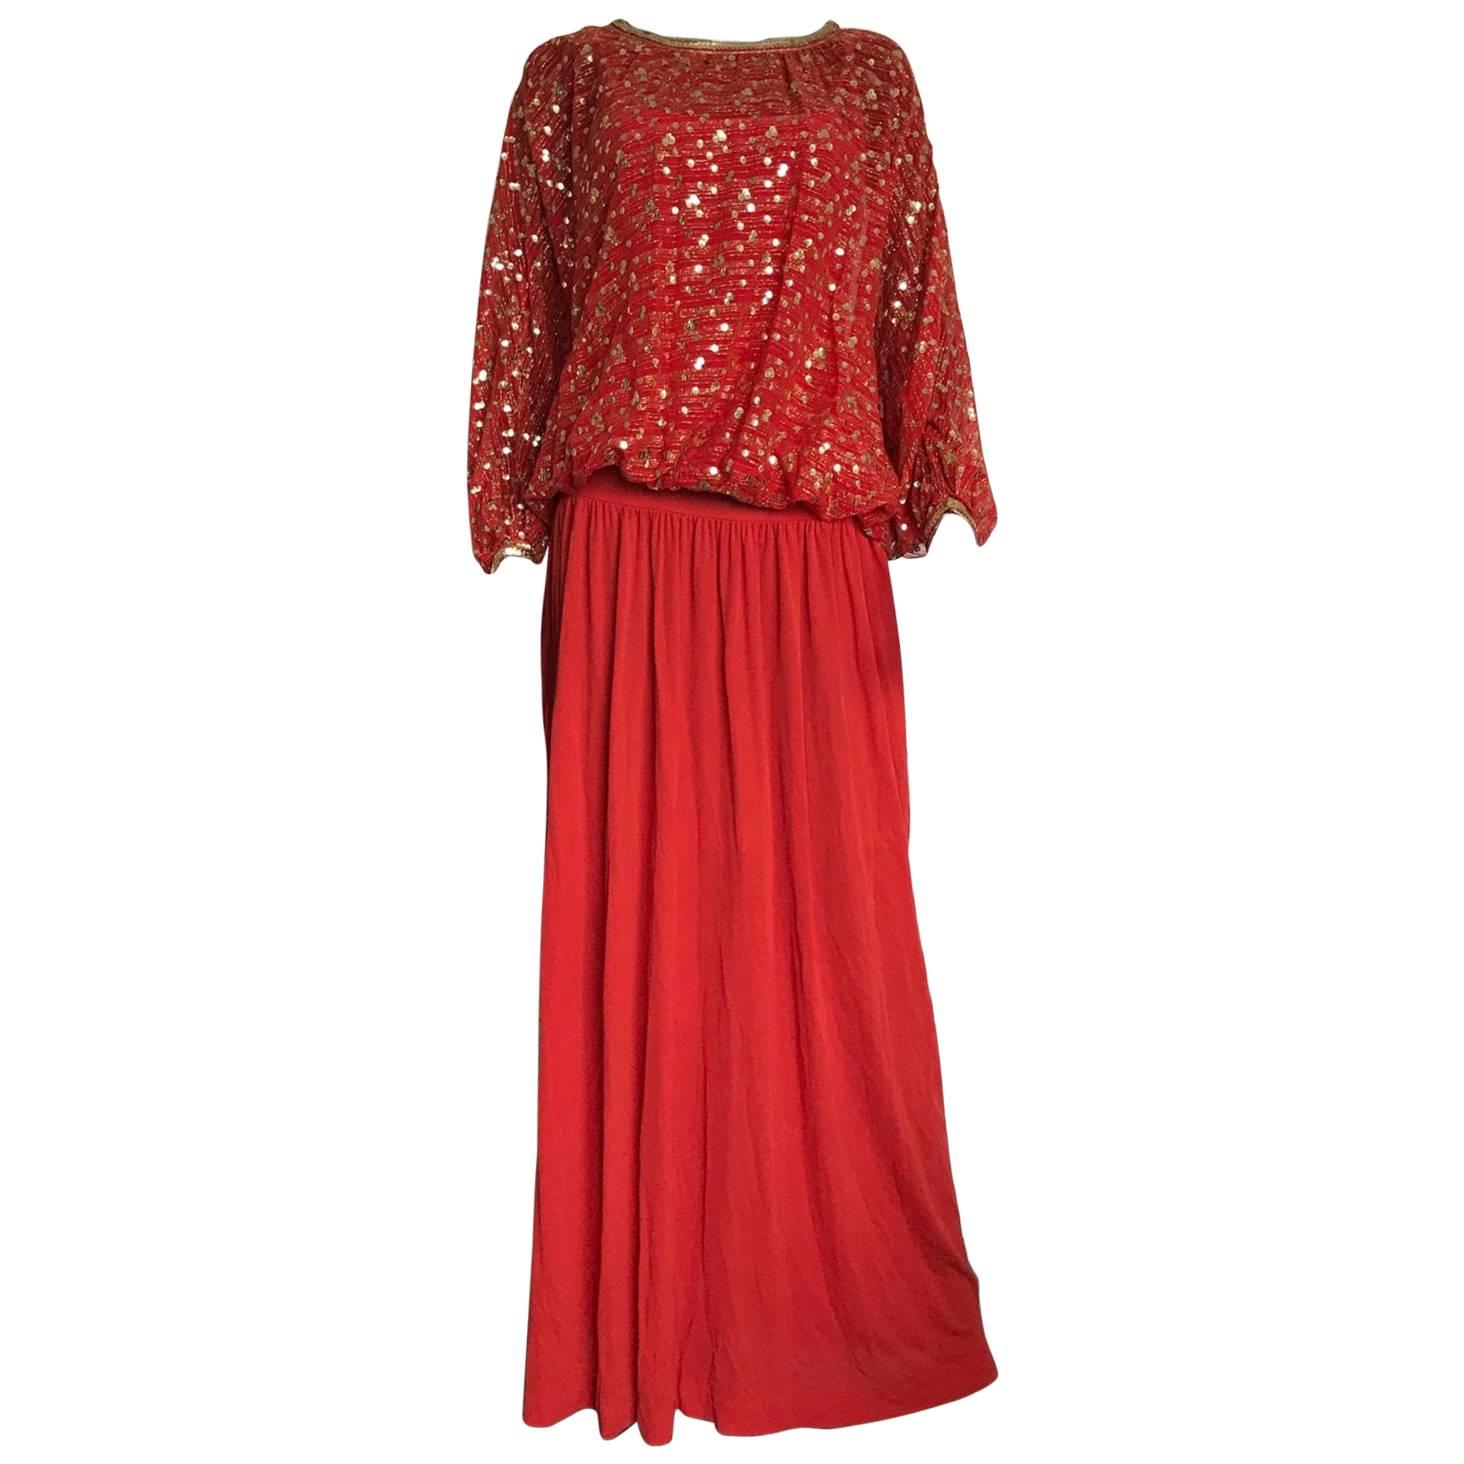 Christian Dior red cocktail outfit, circa 1980, with embroided sequins For Sale